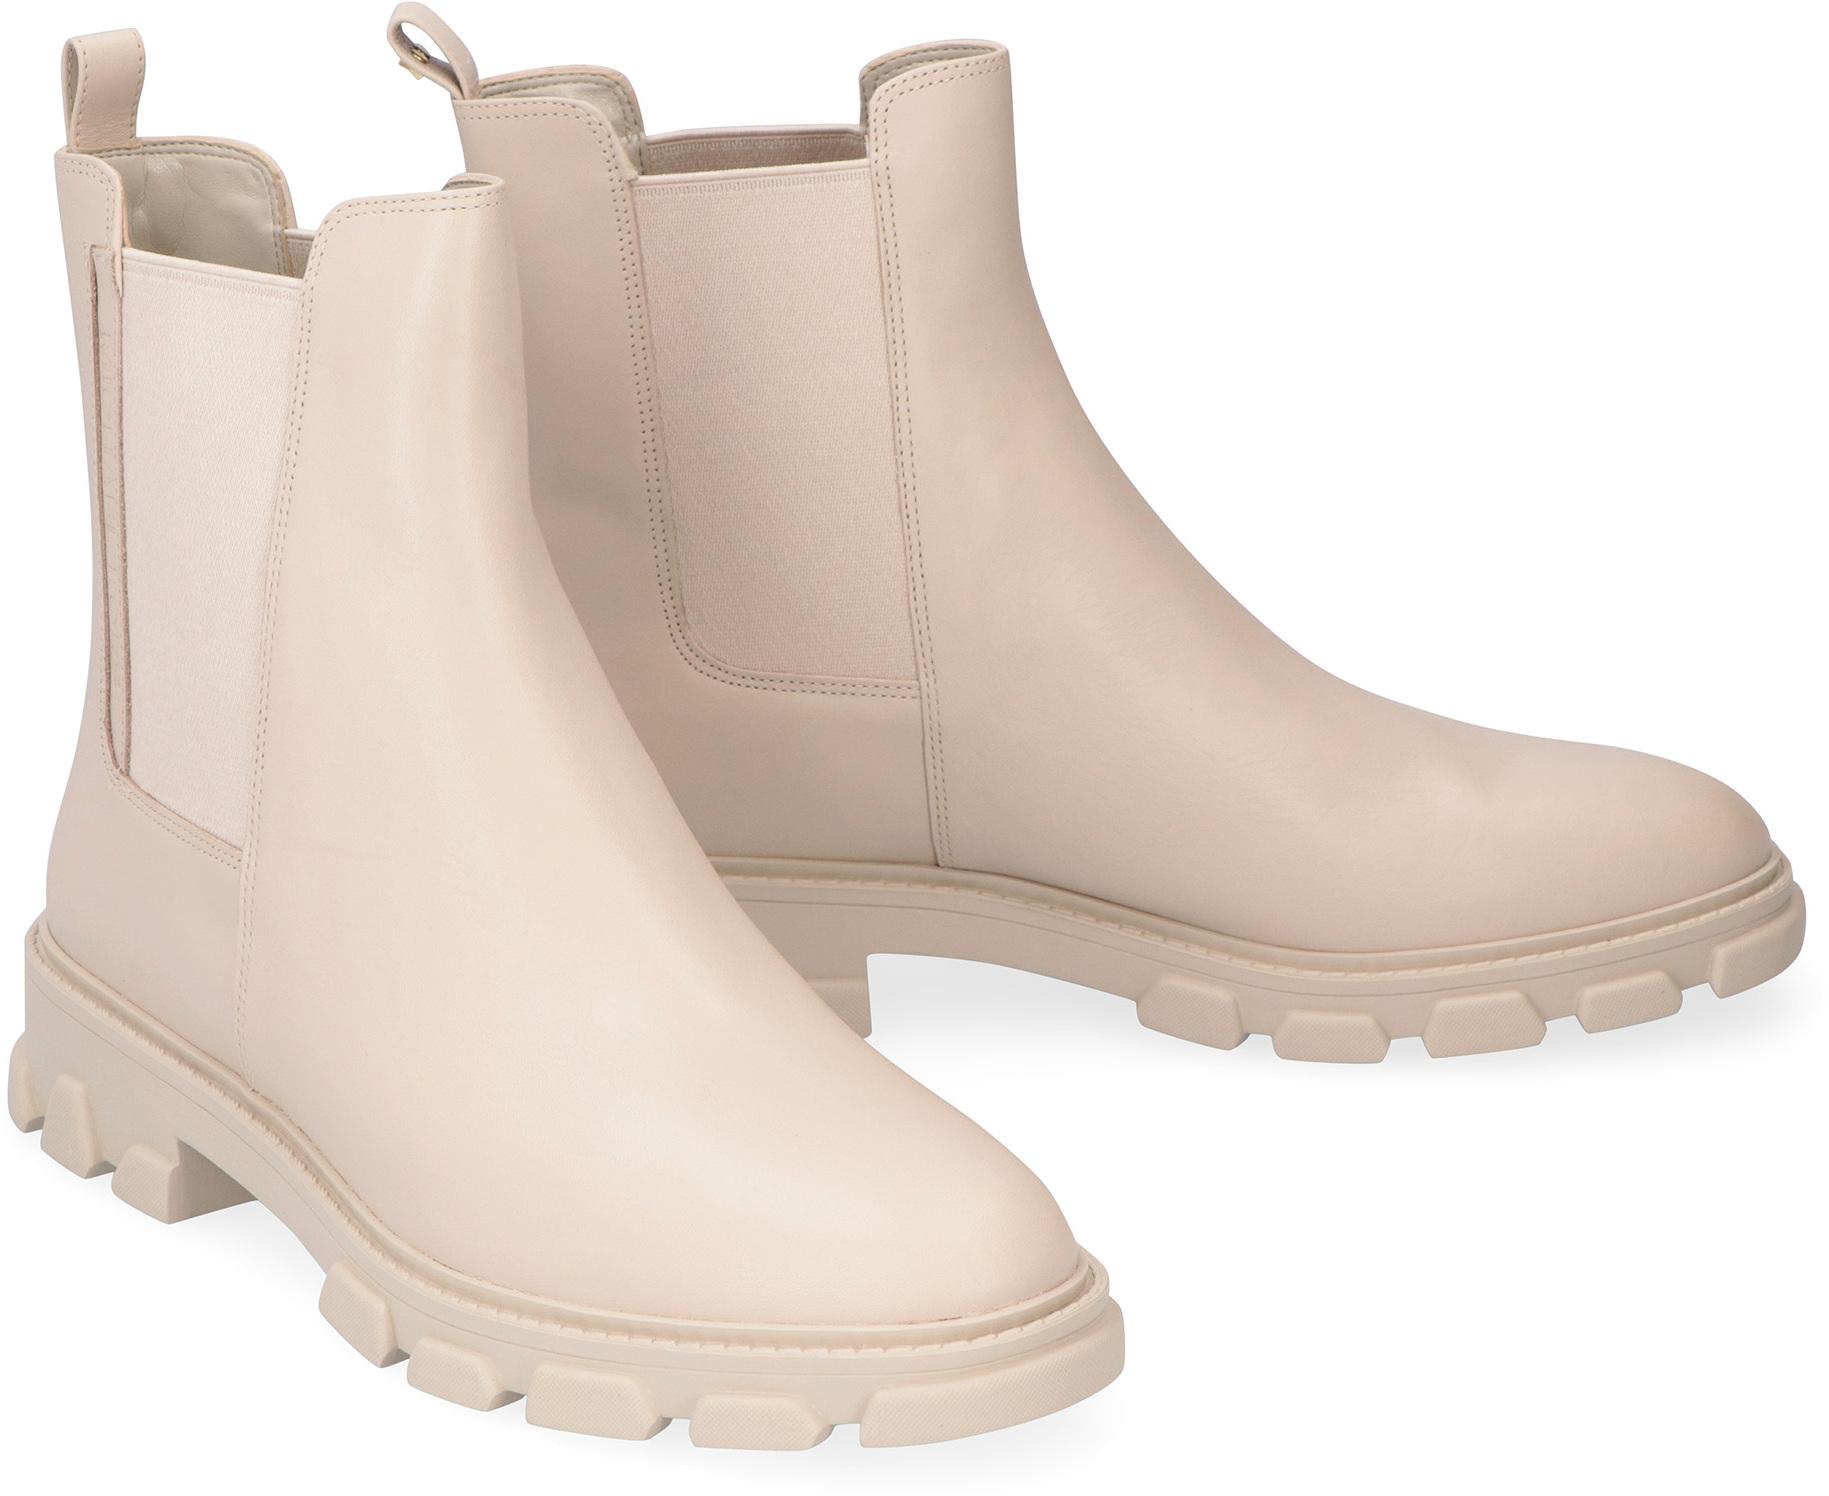 MICHAEL Michael Kors Ridley Leather Chelsea Boots in Beige (Natural) - Lyst